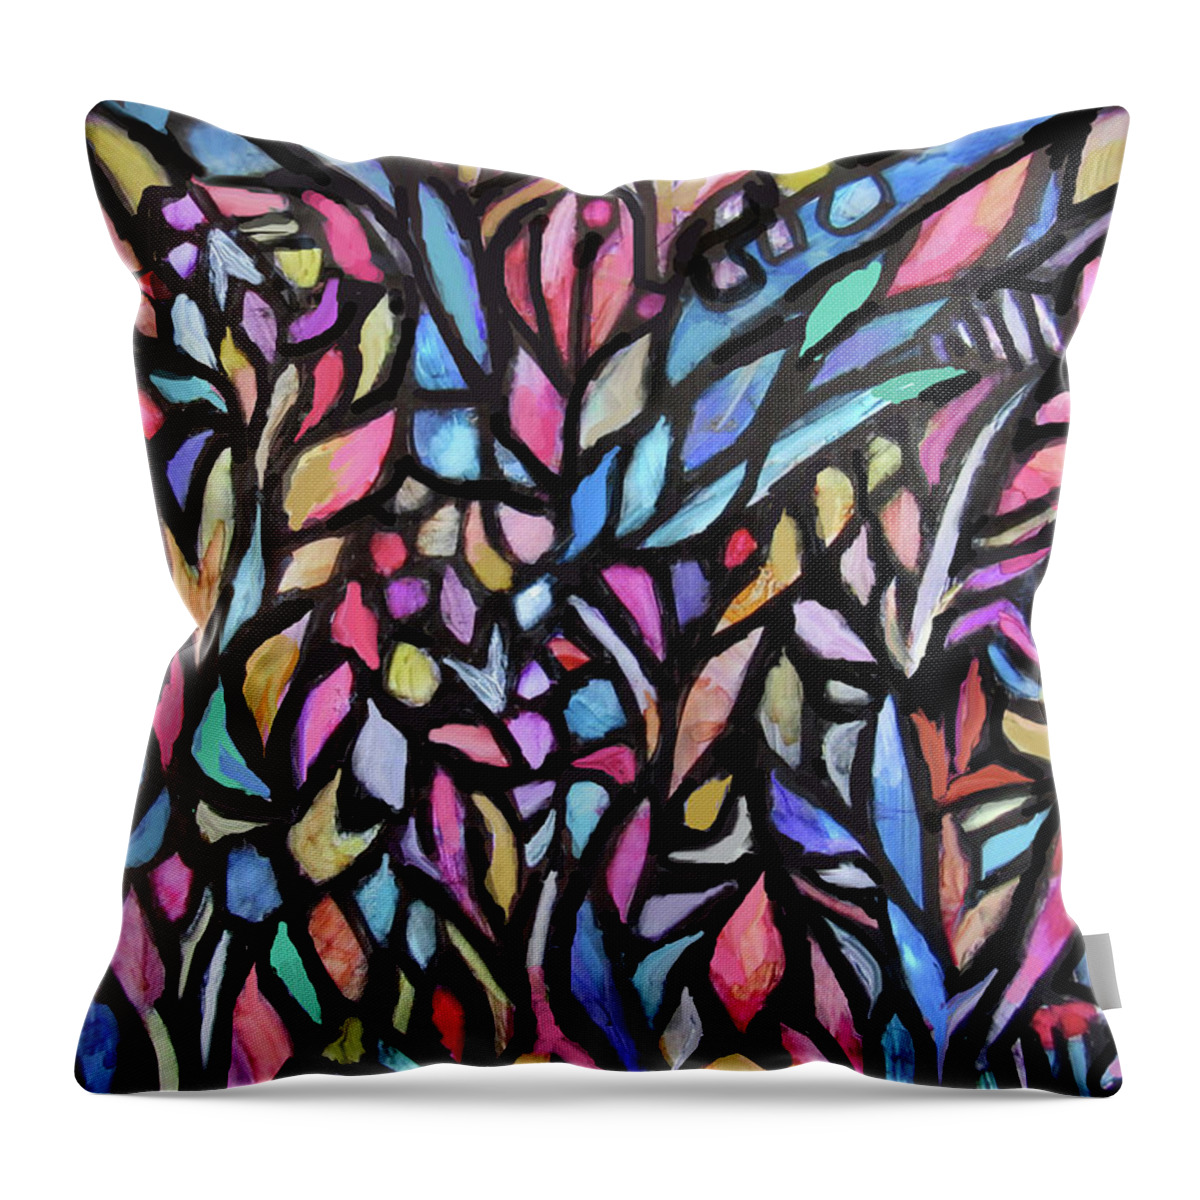 Stained Glass Effect Throw Pillow featuring the mixed media Stained Glass Flowers #3 by Jean Batzell Fitzgerald